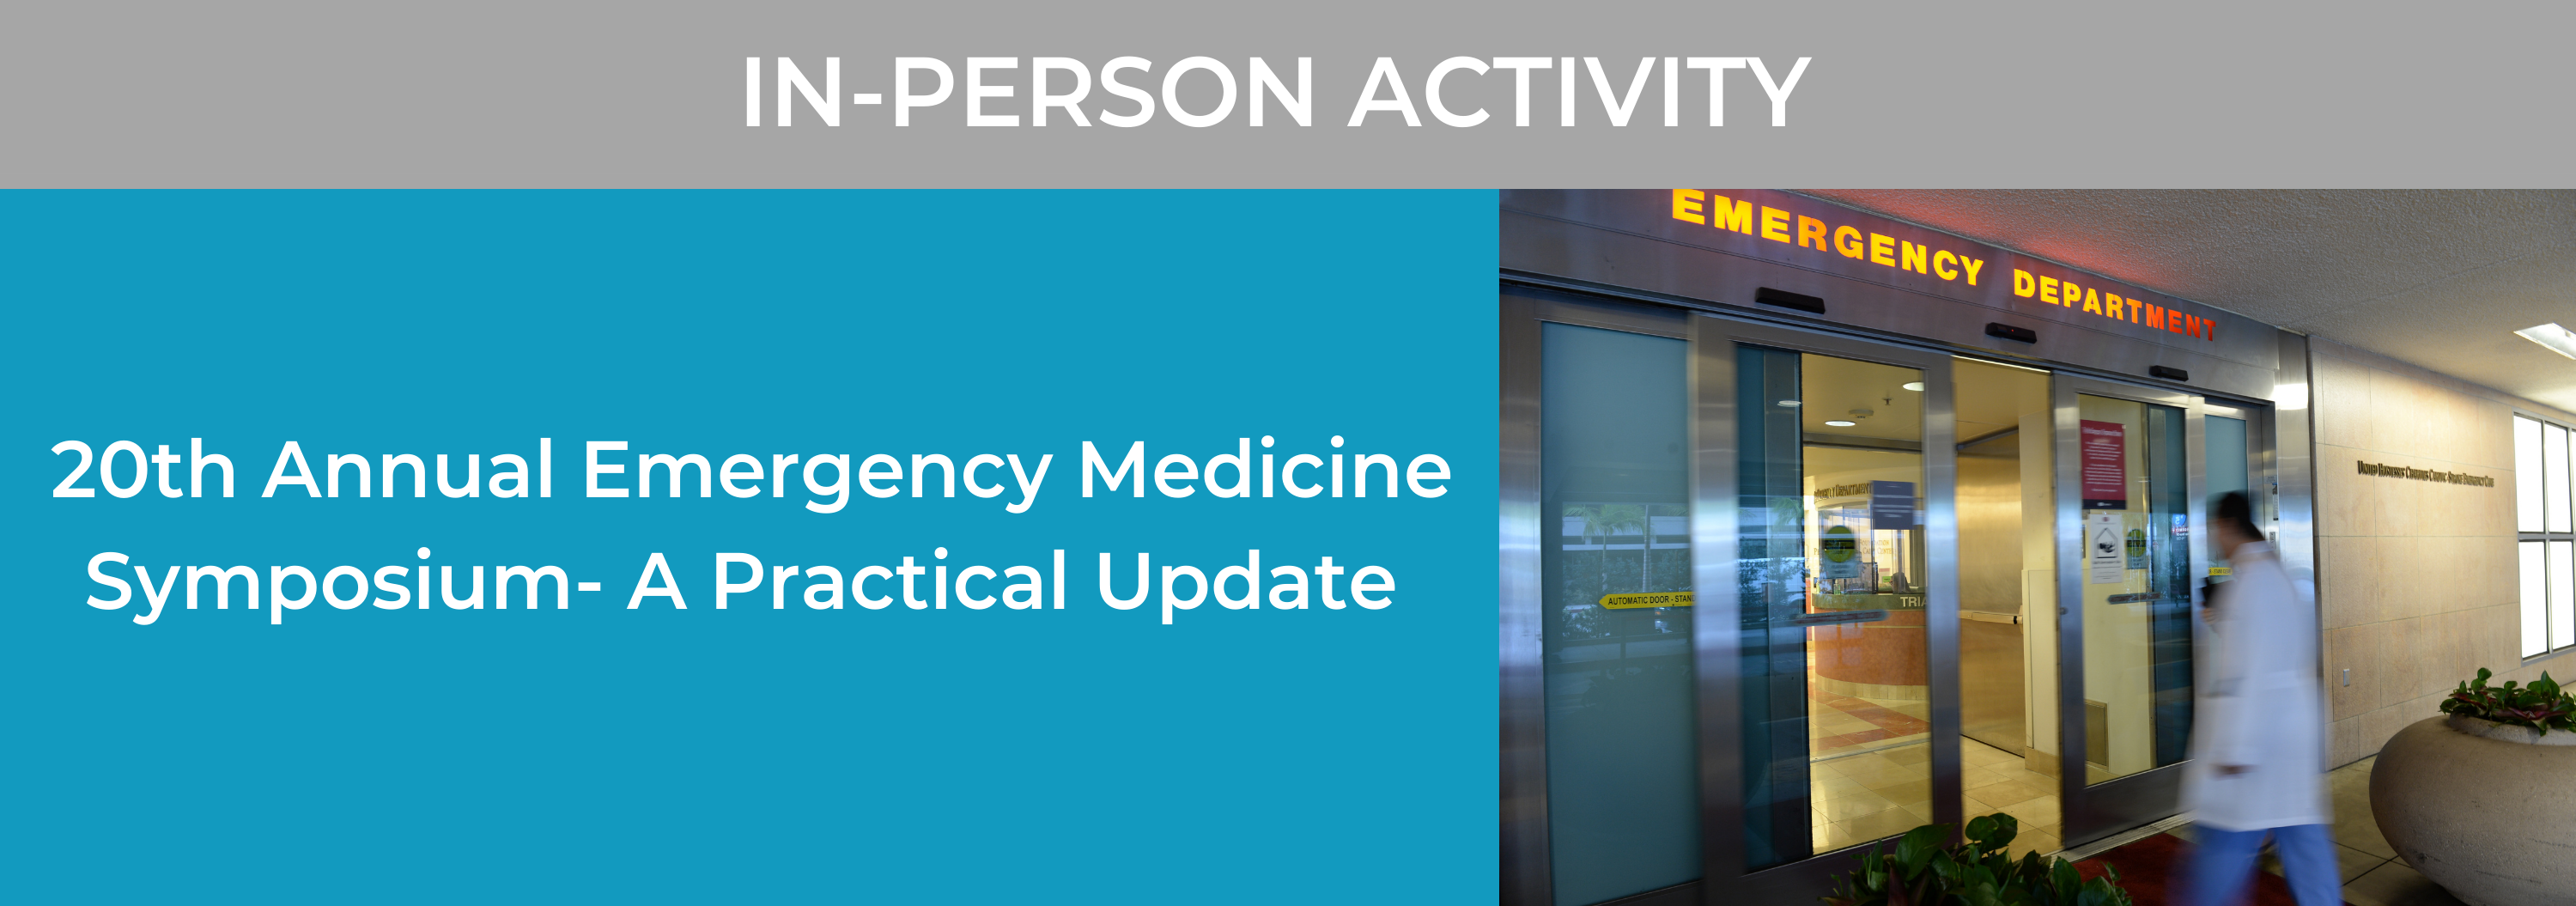 20th Annual Emergency Medicine Symposium - A Practical Update Banner